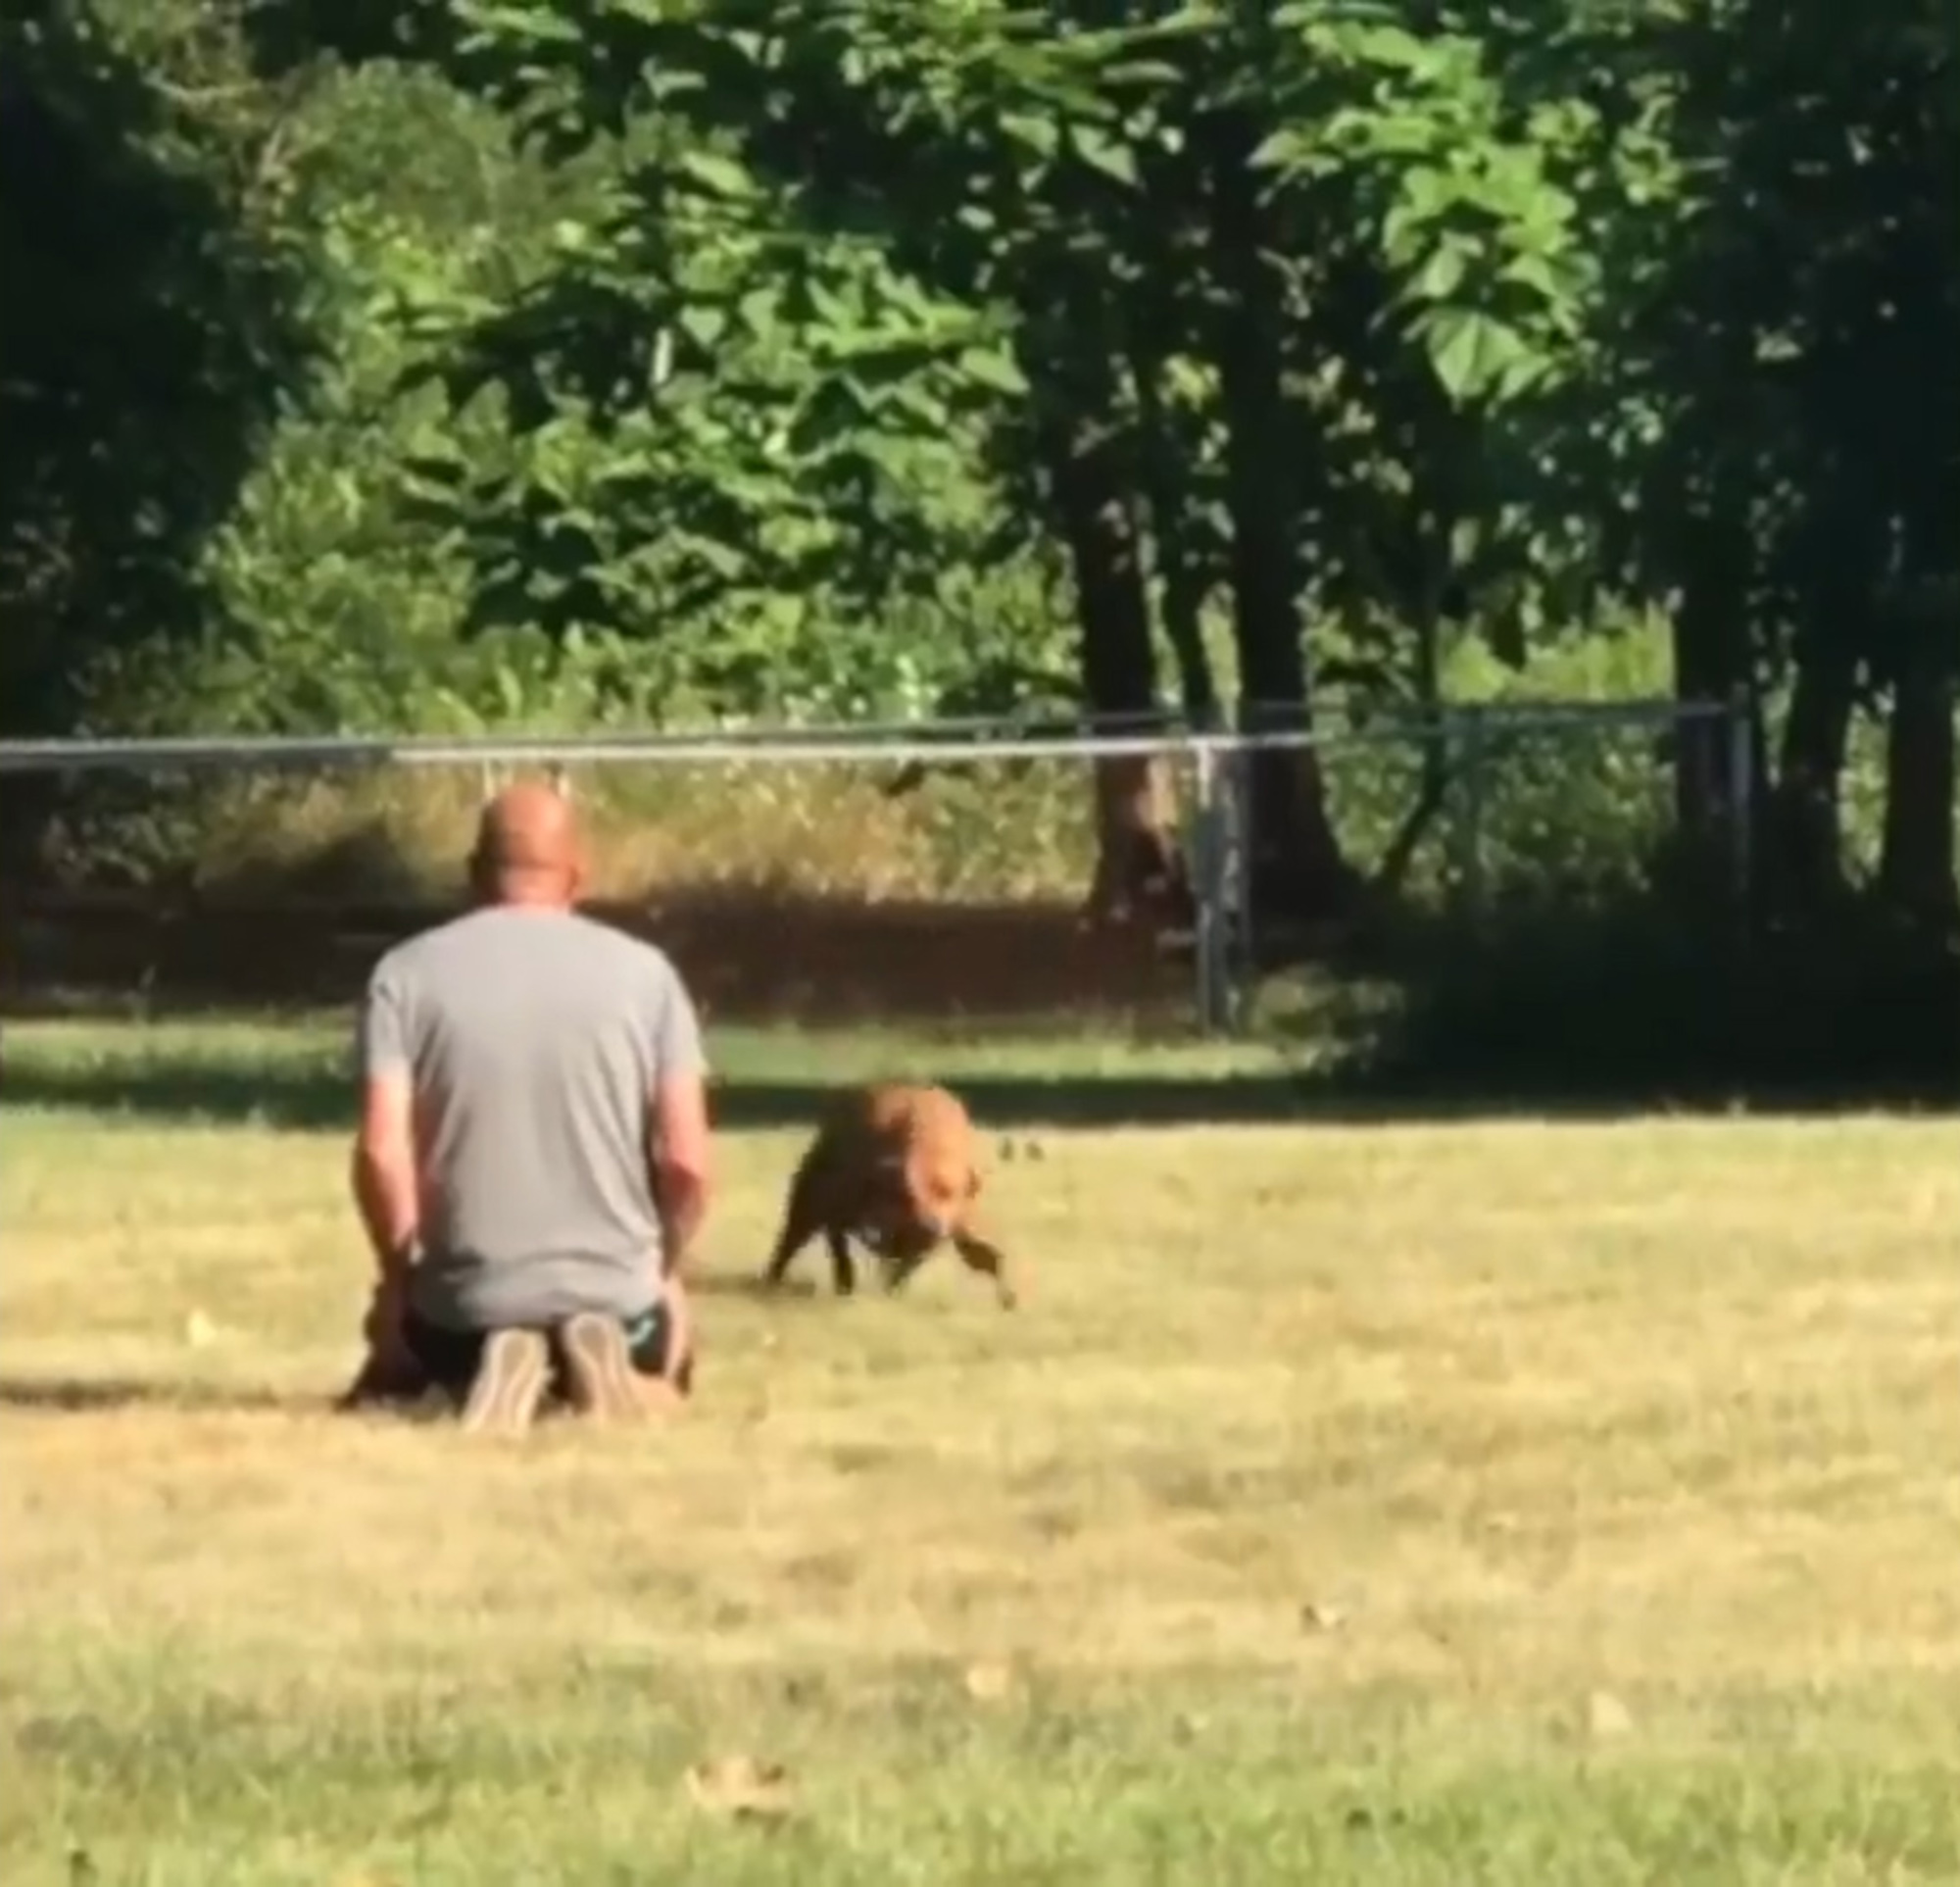 PHOTO: Wrigley, a Rhodesian Ridgeback mix service dpg, is pictured in an image from video reuniting with his owners, Tim and Lanasu Whitner, on July 18, 2018. Video of the event was shared by the Indianapolis Metropolitan Police Department.